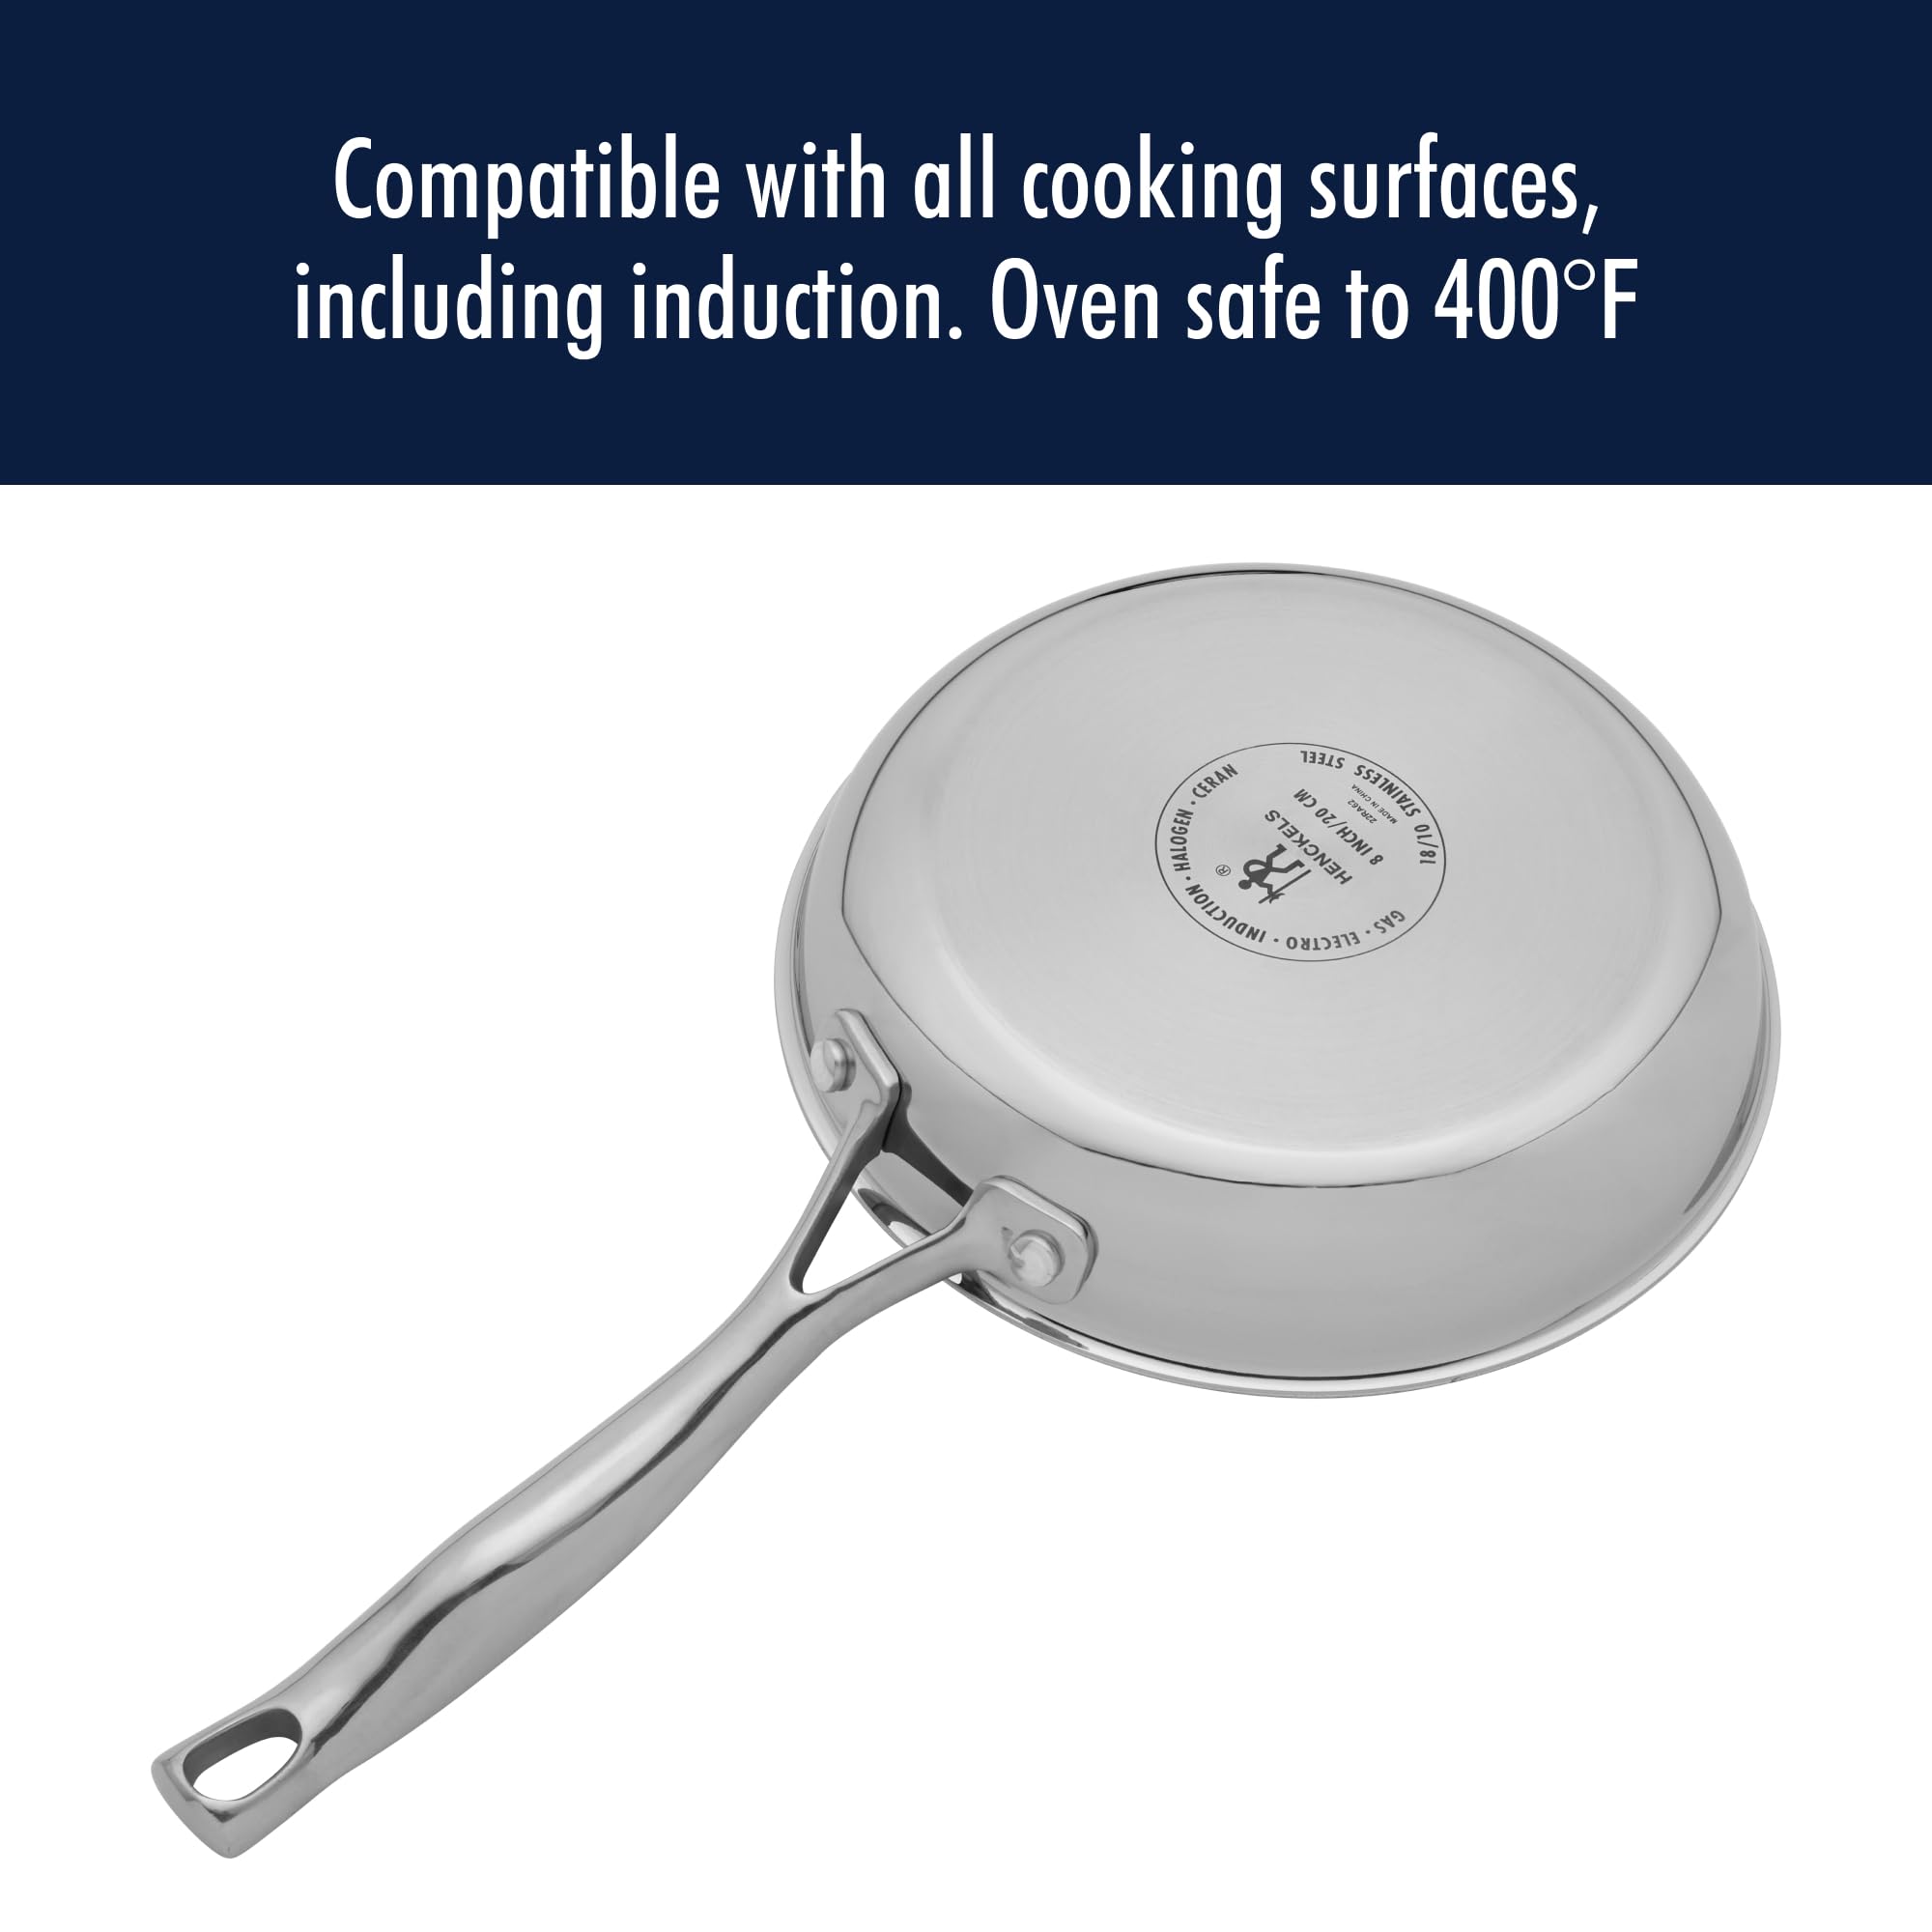 HENCKELS Clad H3 10-pc Induction Pot and Pan Set, Stainless Steel, Durable and Easy to clean